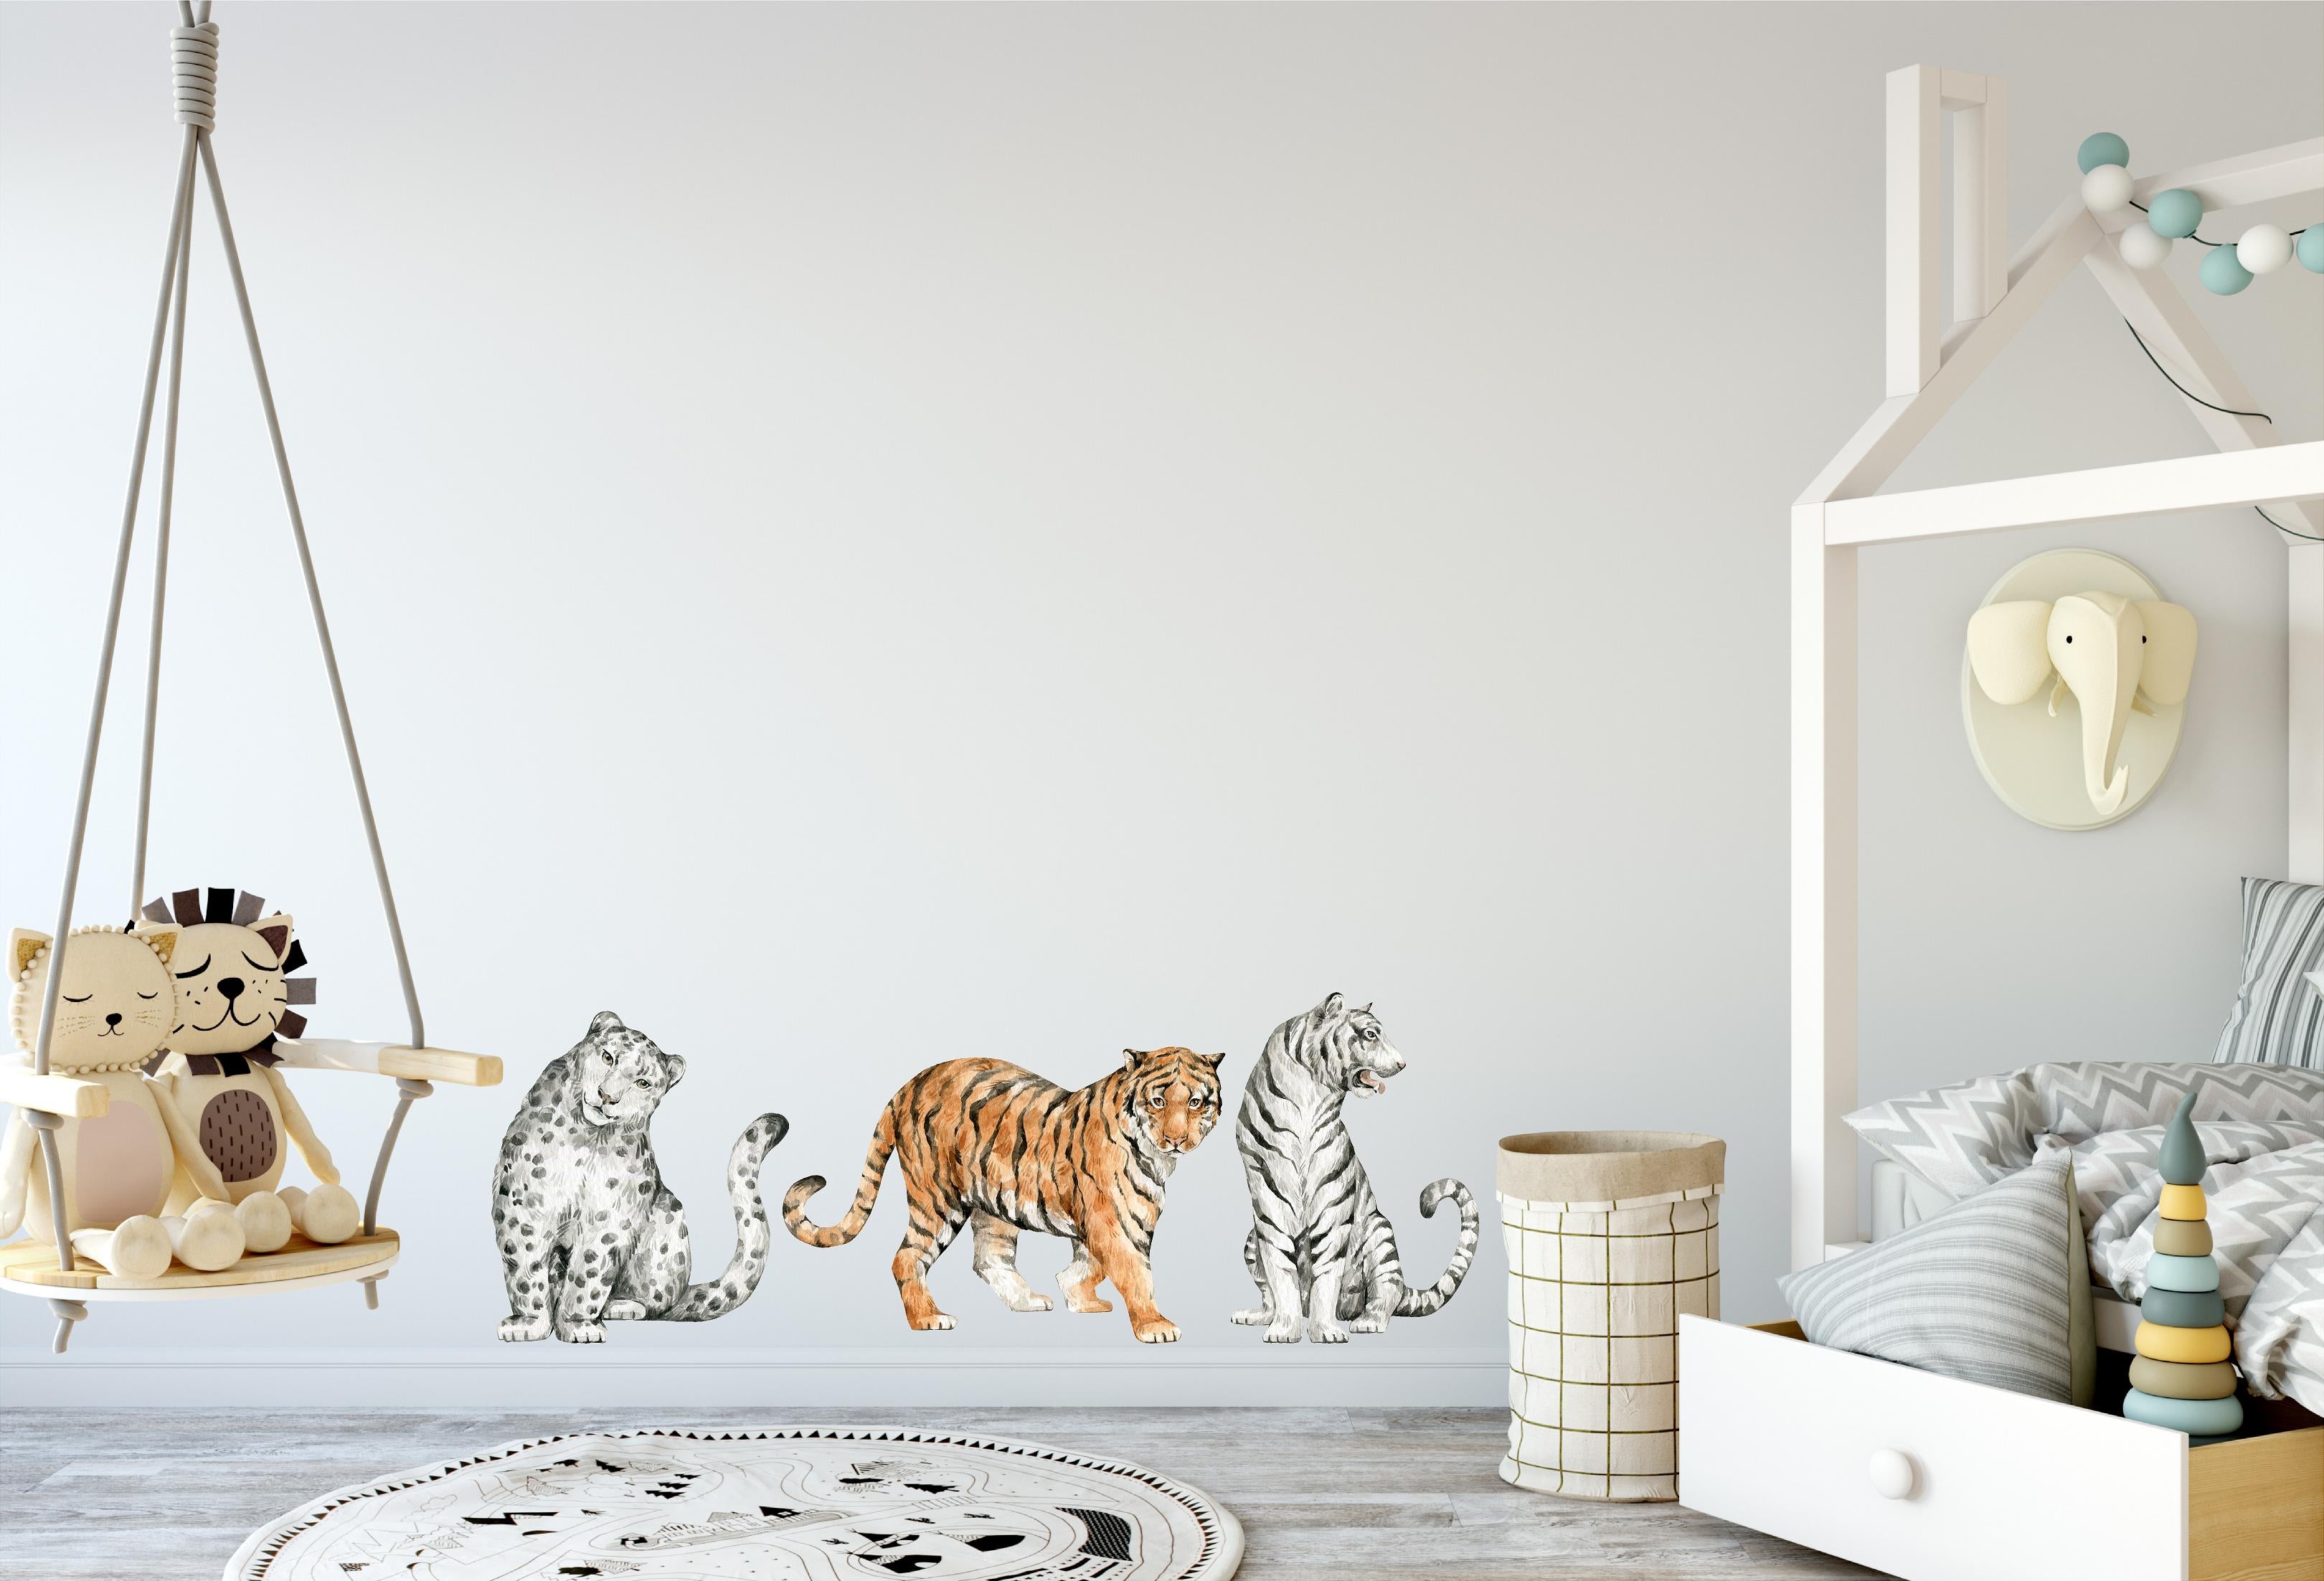 Snow Leopard & Tigers Wall Decal Set of 3 Fabric Wall Sticker | DecalBaby